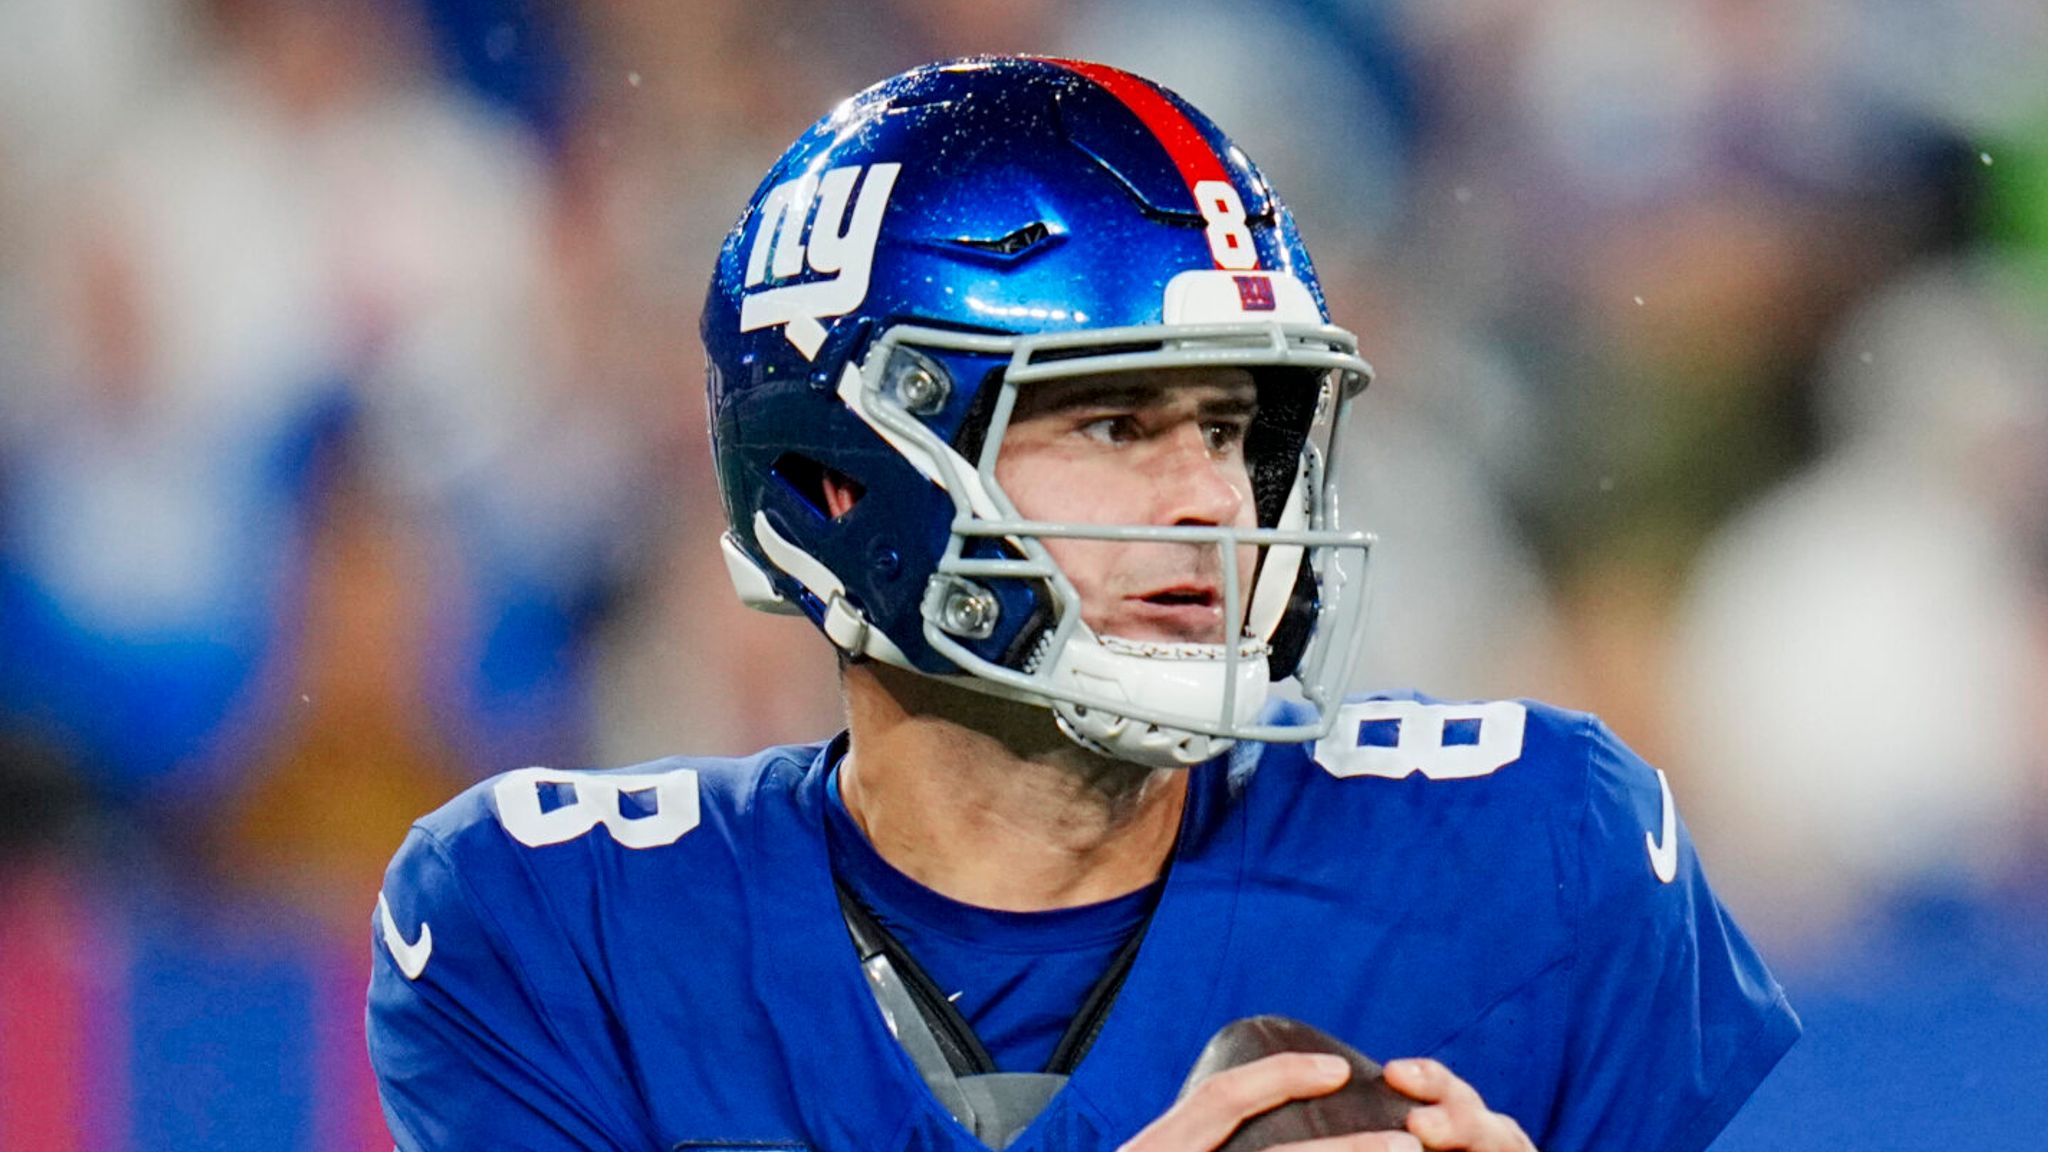 It could get nasty for New York Giants and Daniel Jones after